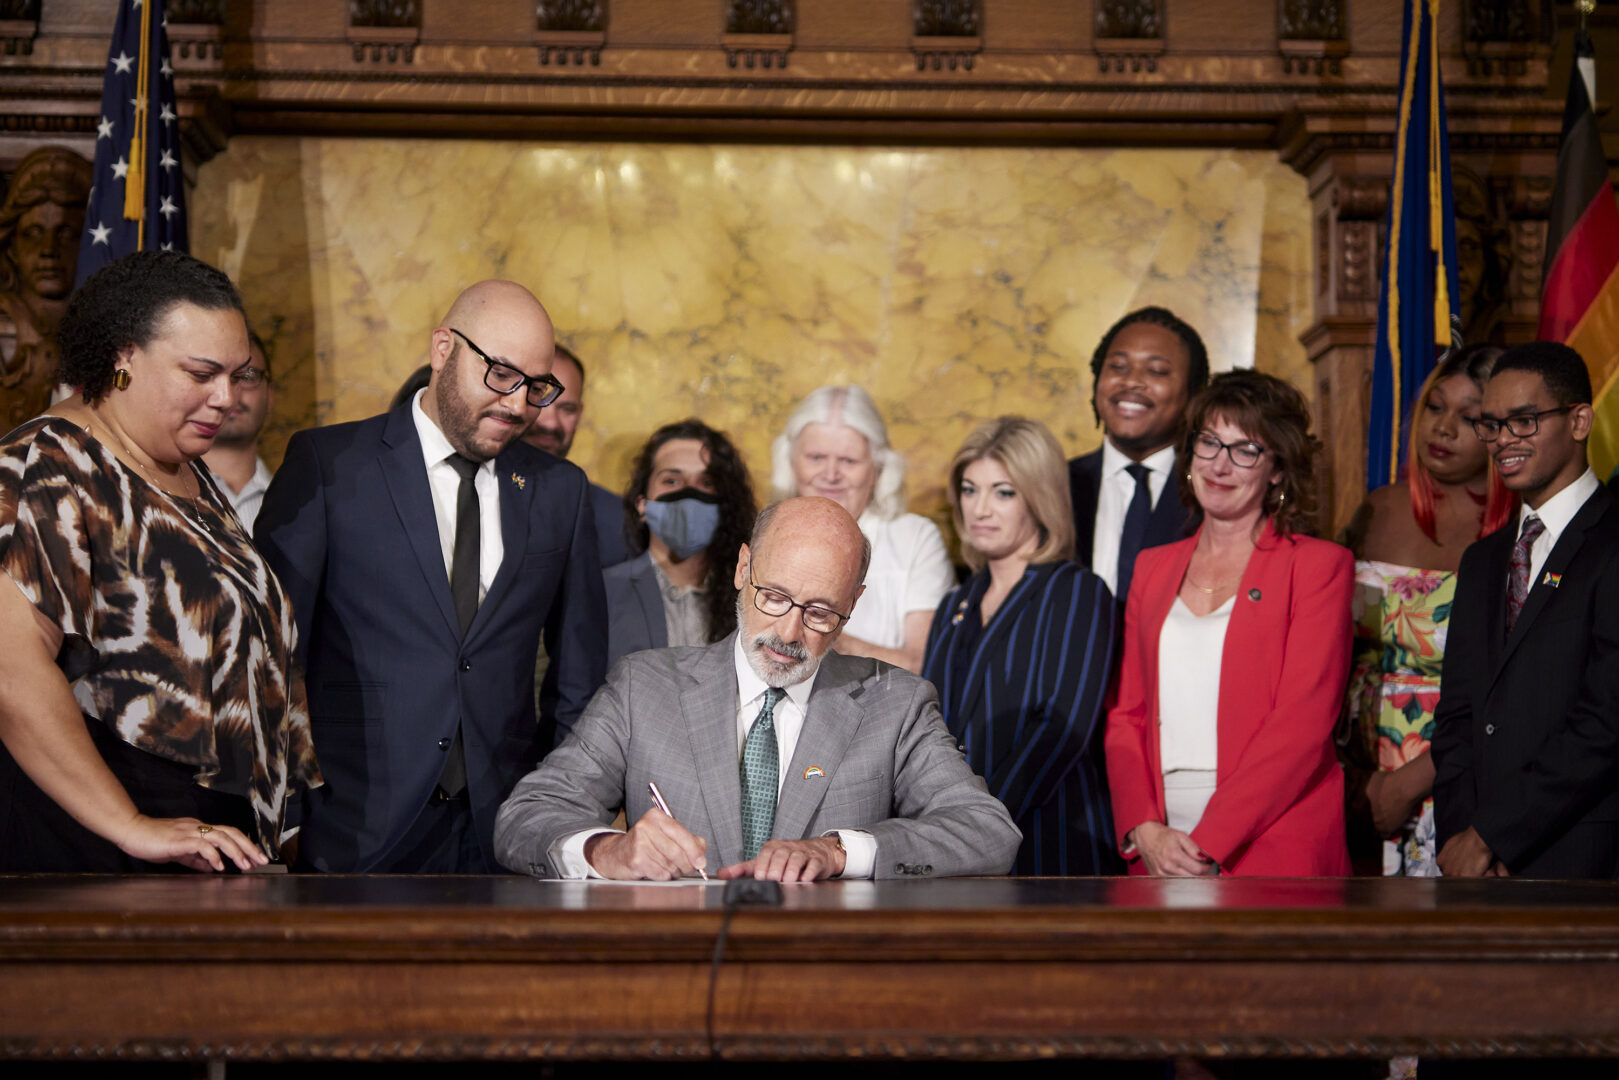 Governor Tom Wolf signed Executive Order 2022-2 to protect Pennsylvanians from conversion therapy. “Conversion therapy is a traumatic practice based on junk science that actively harms the people it supposedly seeks to treat,” said Gov. Wolf. “This discriminatory practice is widely rejected by medical and scientific professionals and has been proven to lead to worse mental health outcomes for LGBTQIA+ youth subjected to it. This is about keeping our children safe from bullying and extreme practices that harm them.” Harrisburg, PA – August 16, 2022